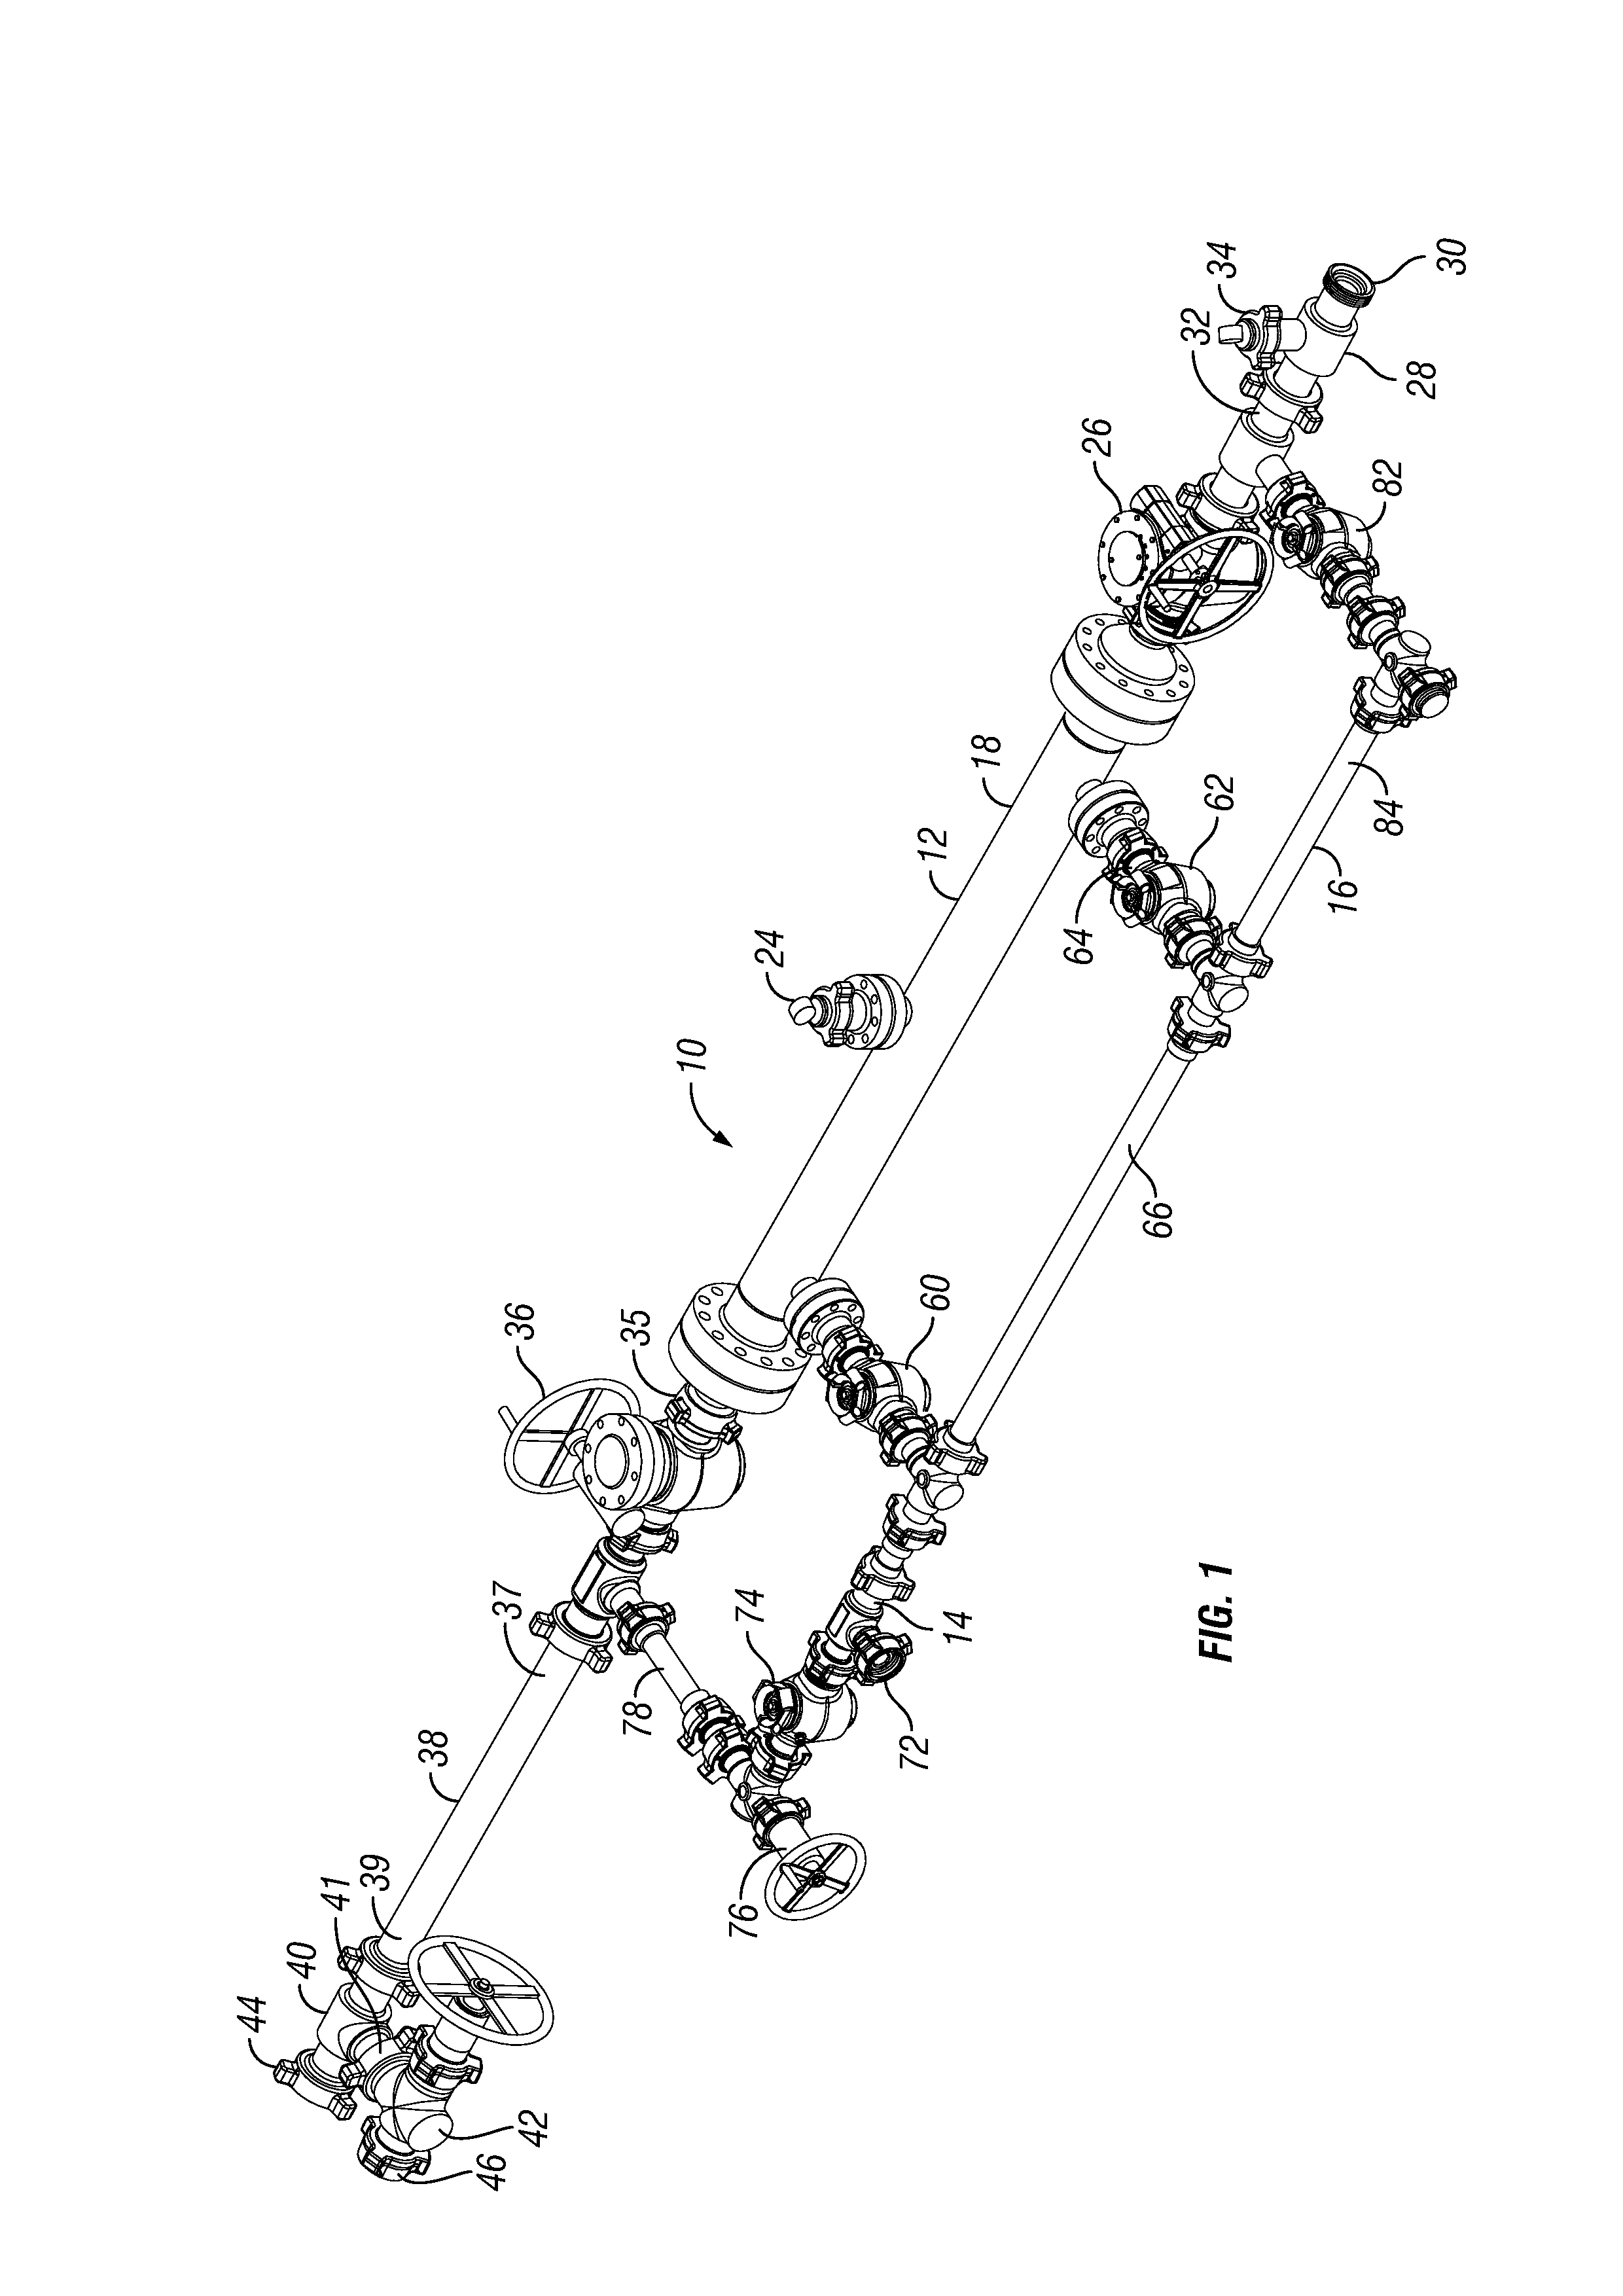 Method and system for surface filtering of solids from return fluids in well operations